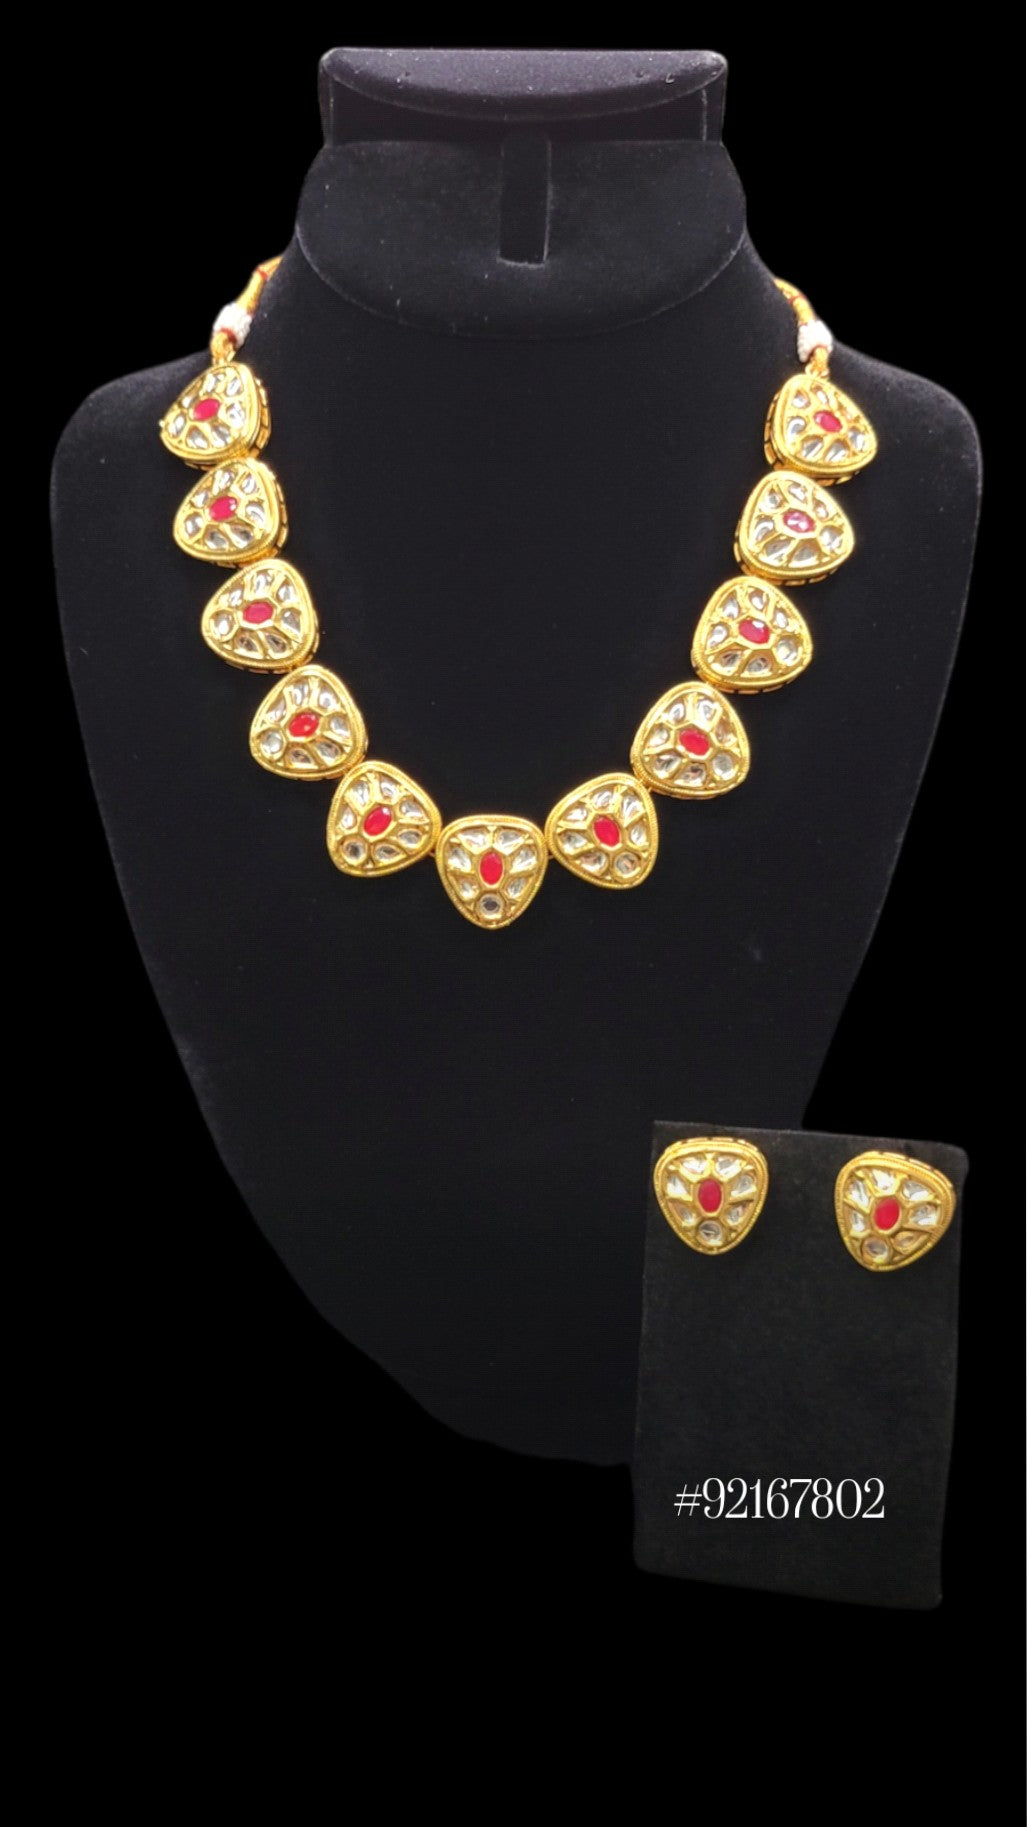 STATEMENT NECKLACE WITH EARRINGS